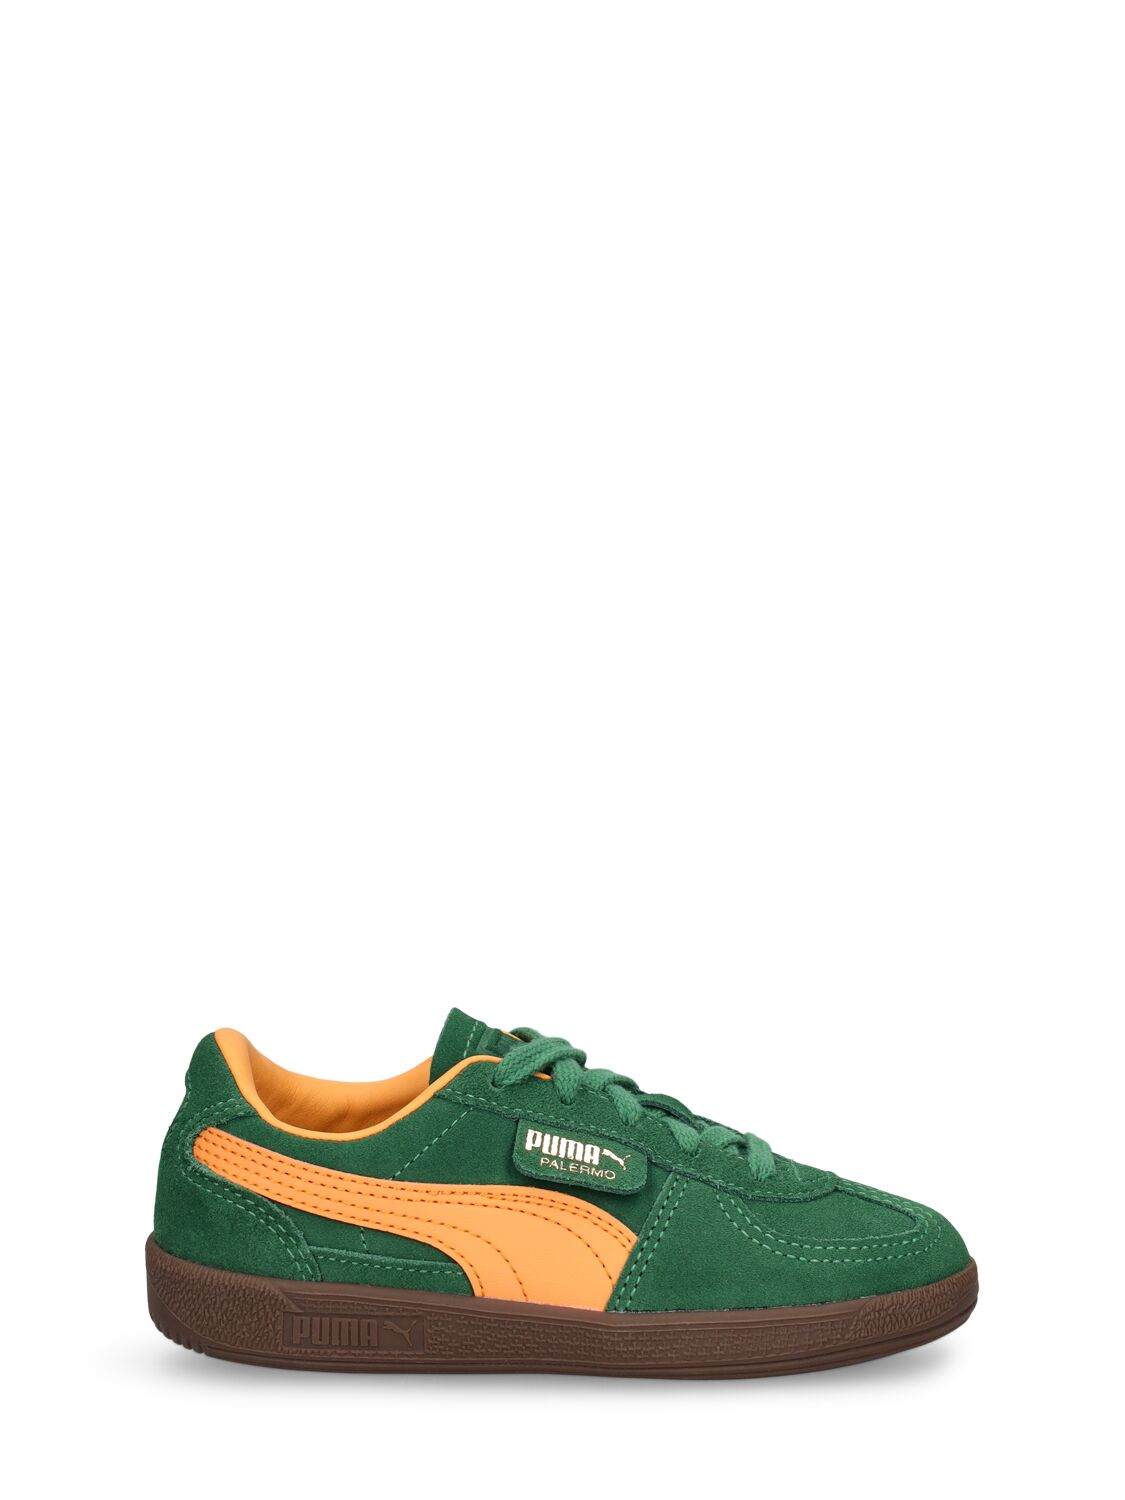 Puma Kids' Palermo Ps Lace-up Trainers In Green